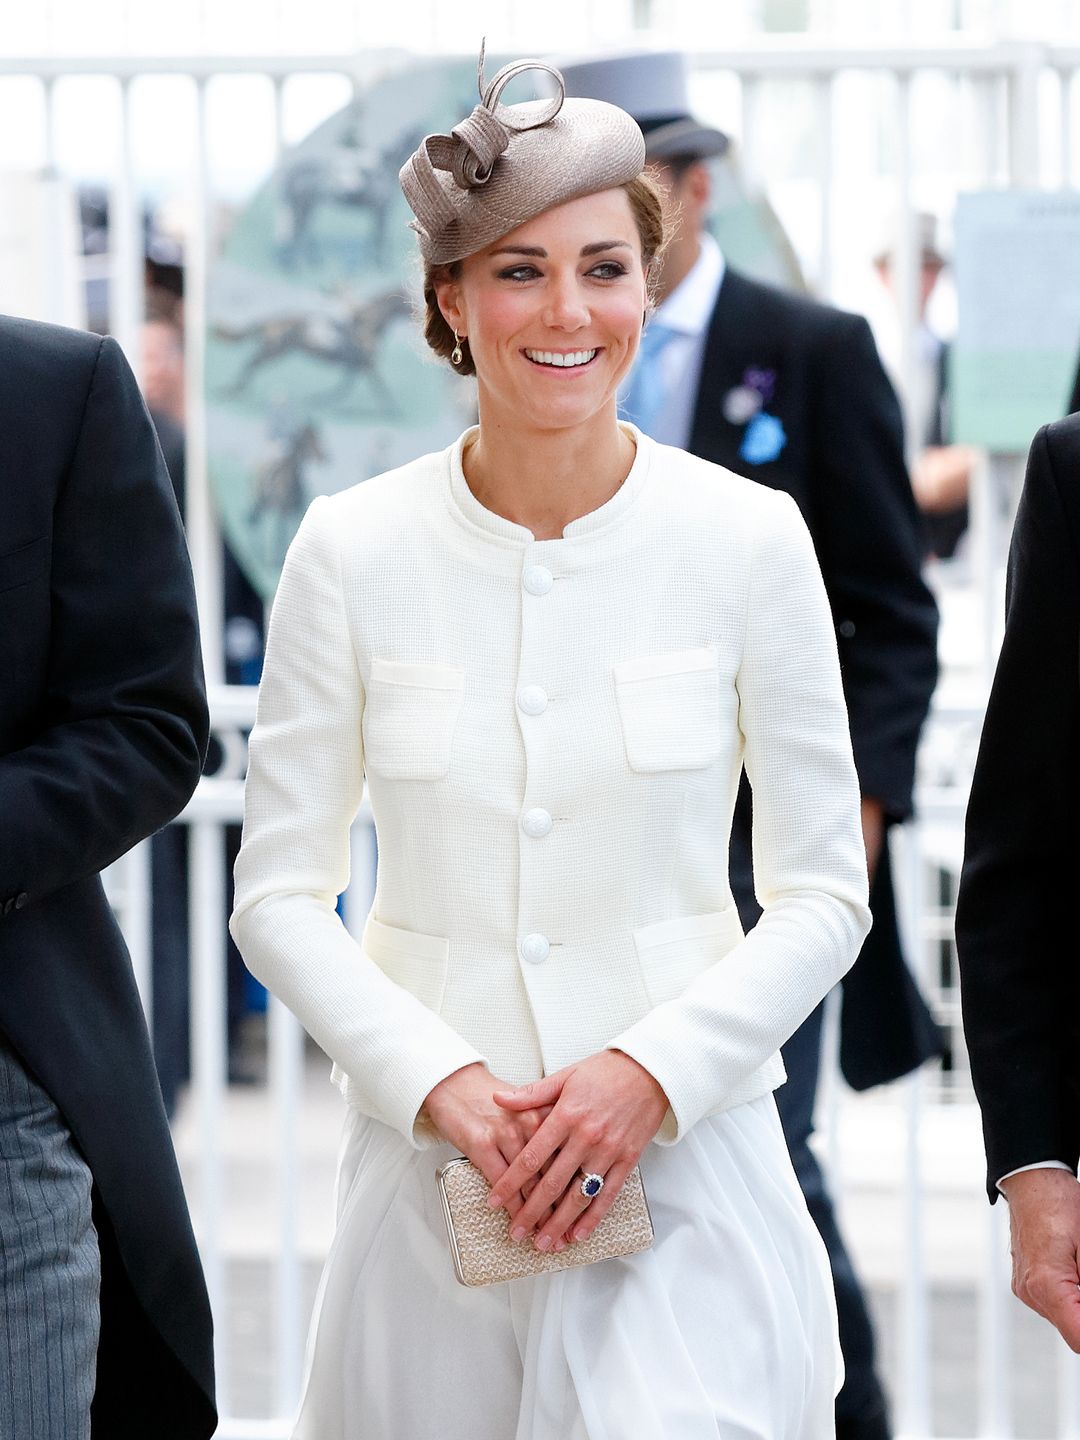 princess kate at races in white outfit 